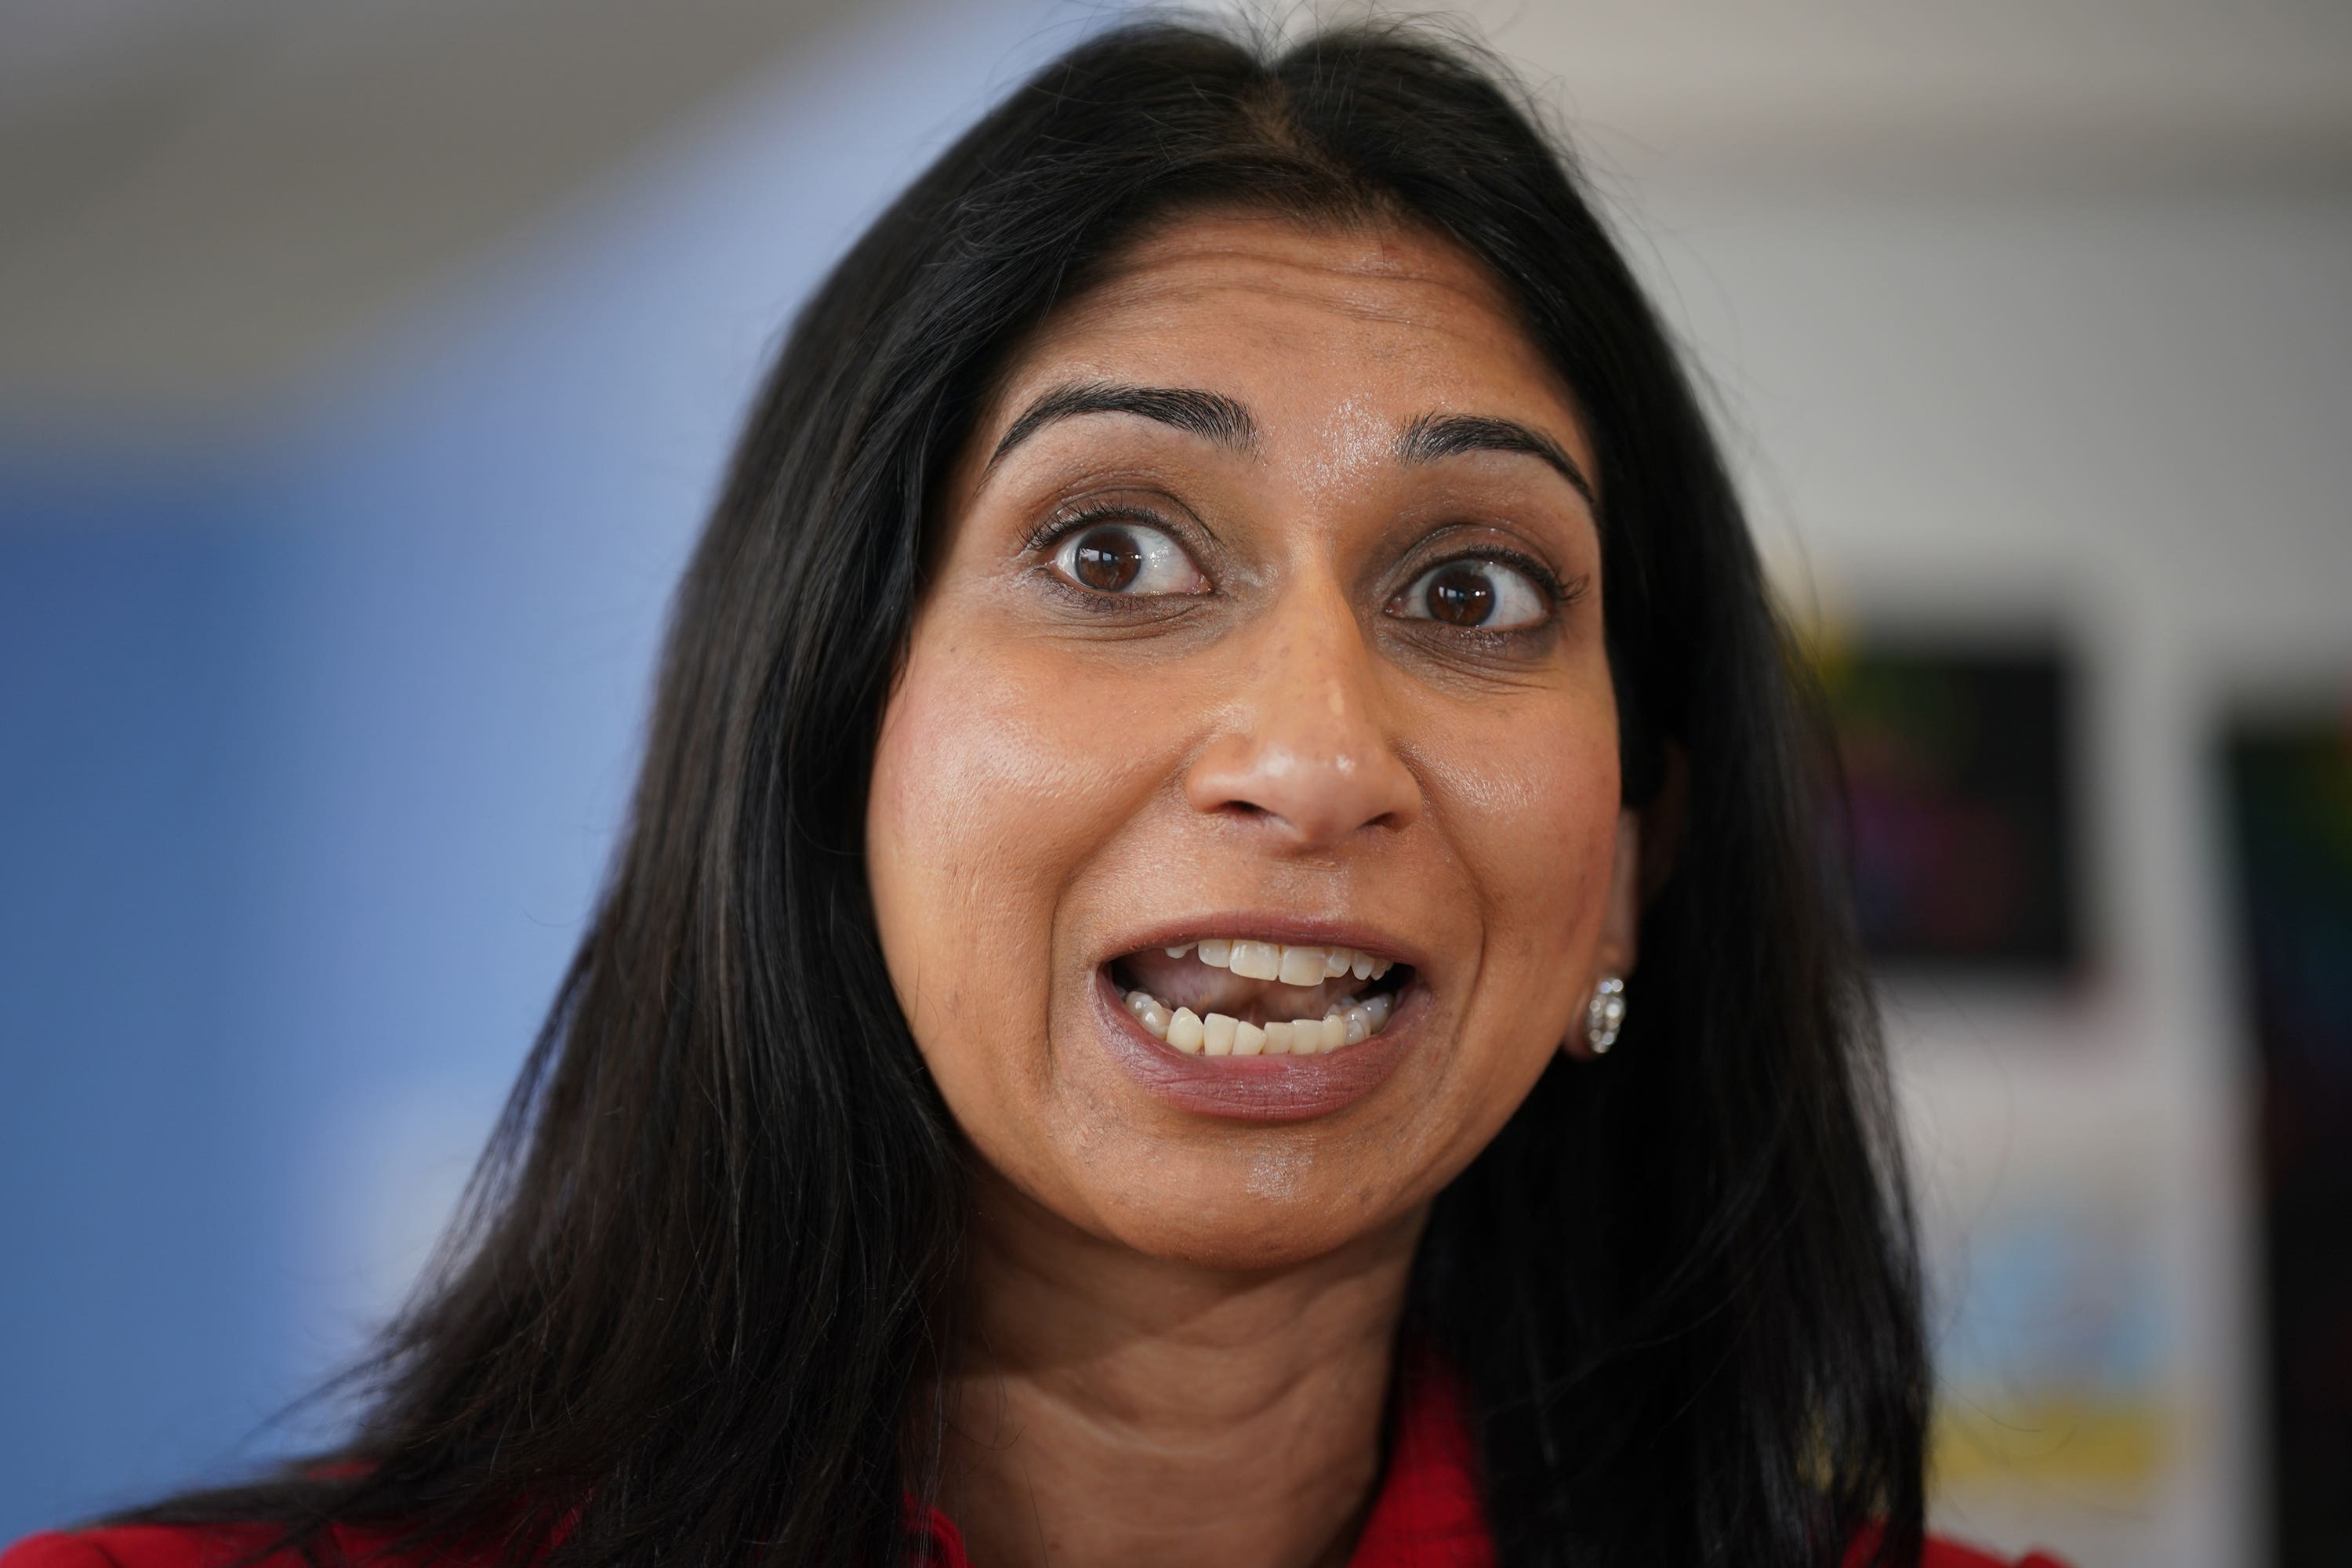 Suella Braverman claimed multiculturalism comments ‘mischaracterised’